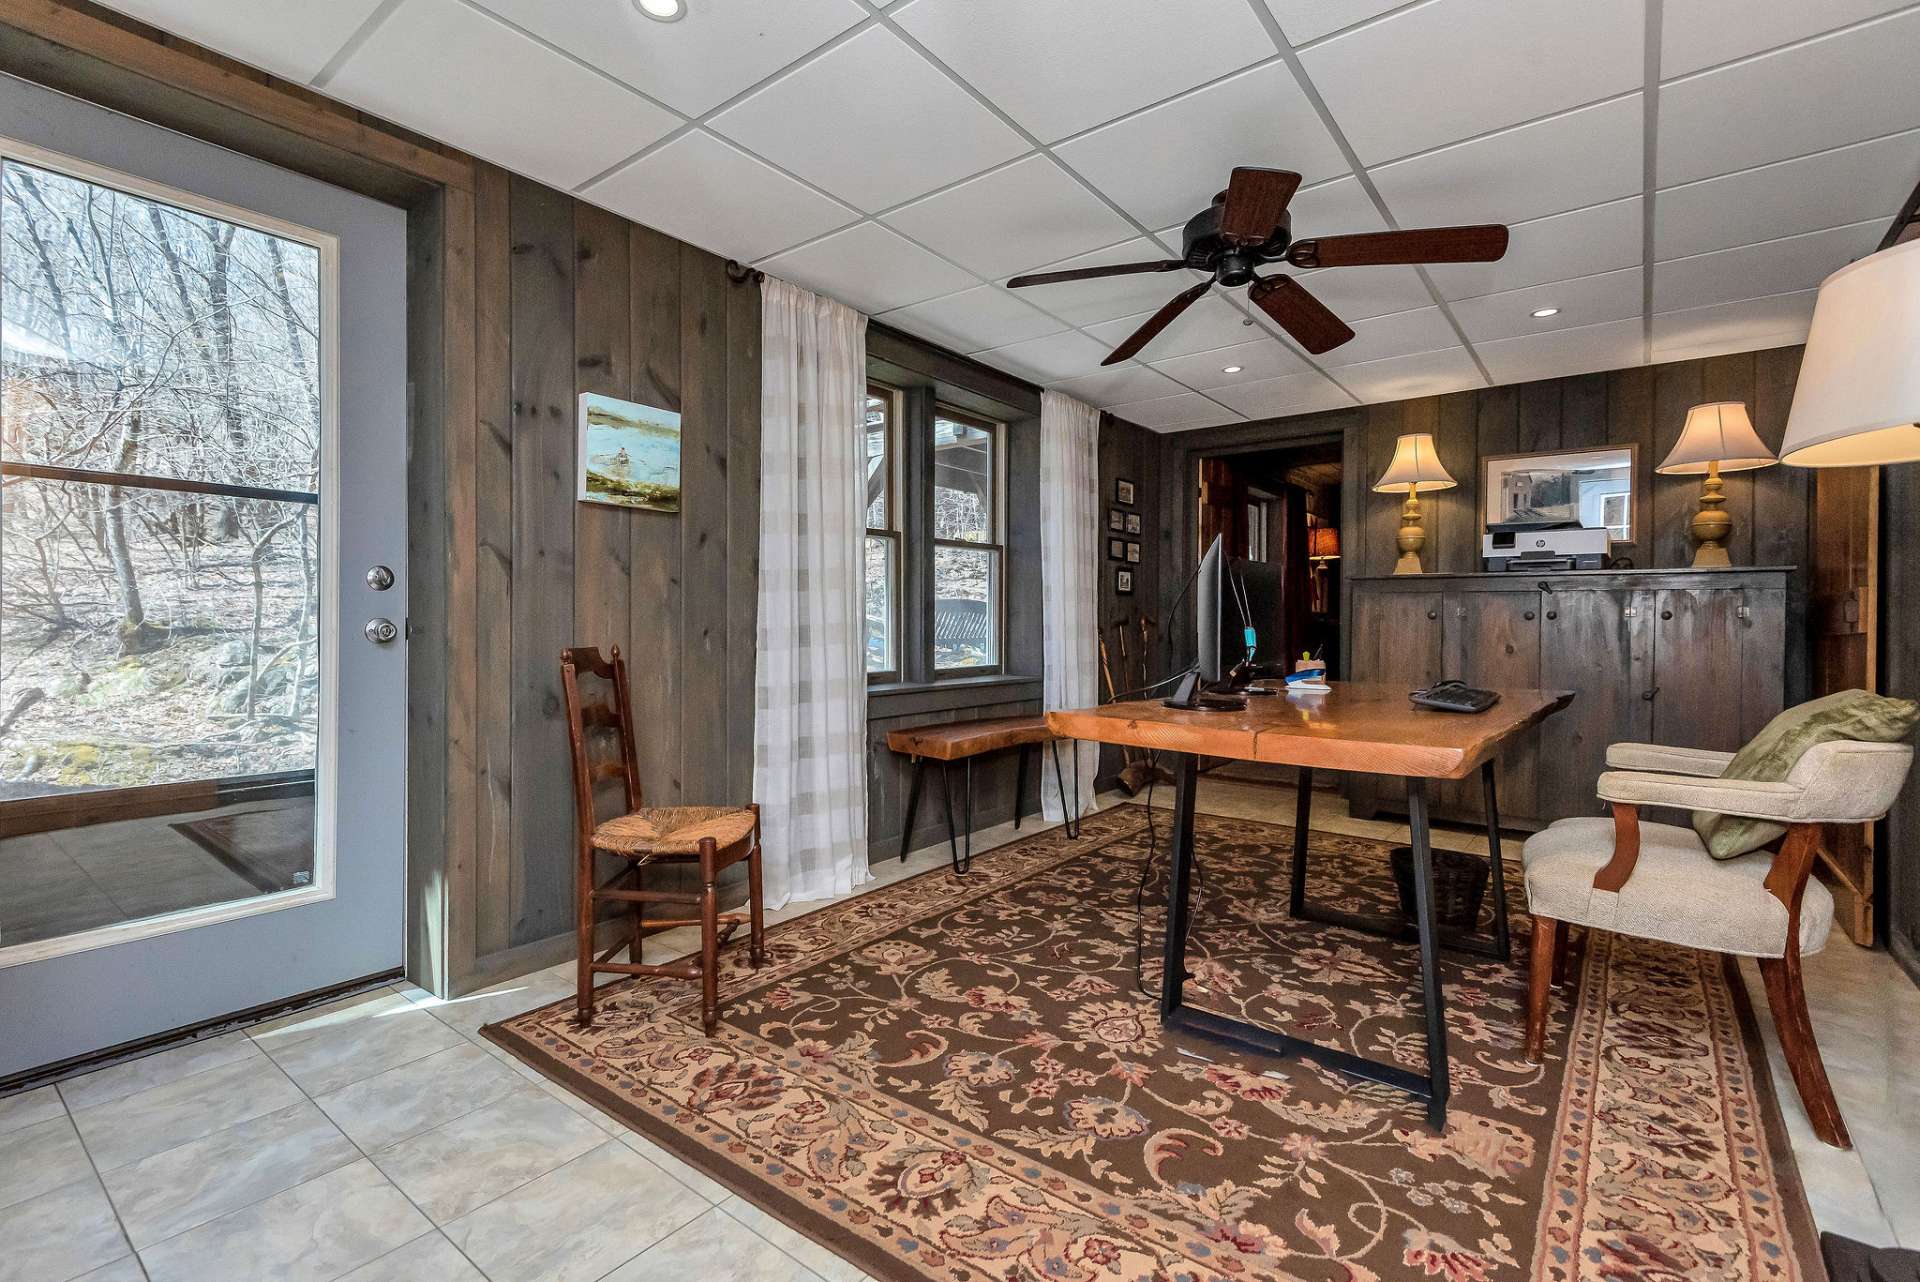 Two separate exterior doors in this area provide convenient access to the outdoor living areas surrounding the cabin, allowing occupants to seamlessly transition between indoor and outdoor spaces.